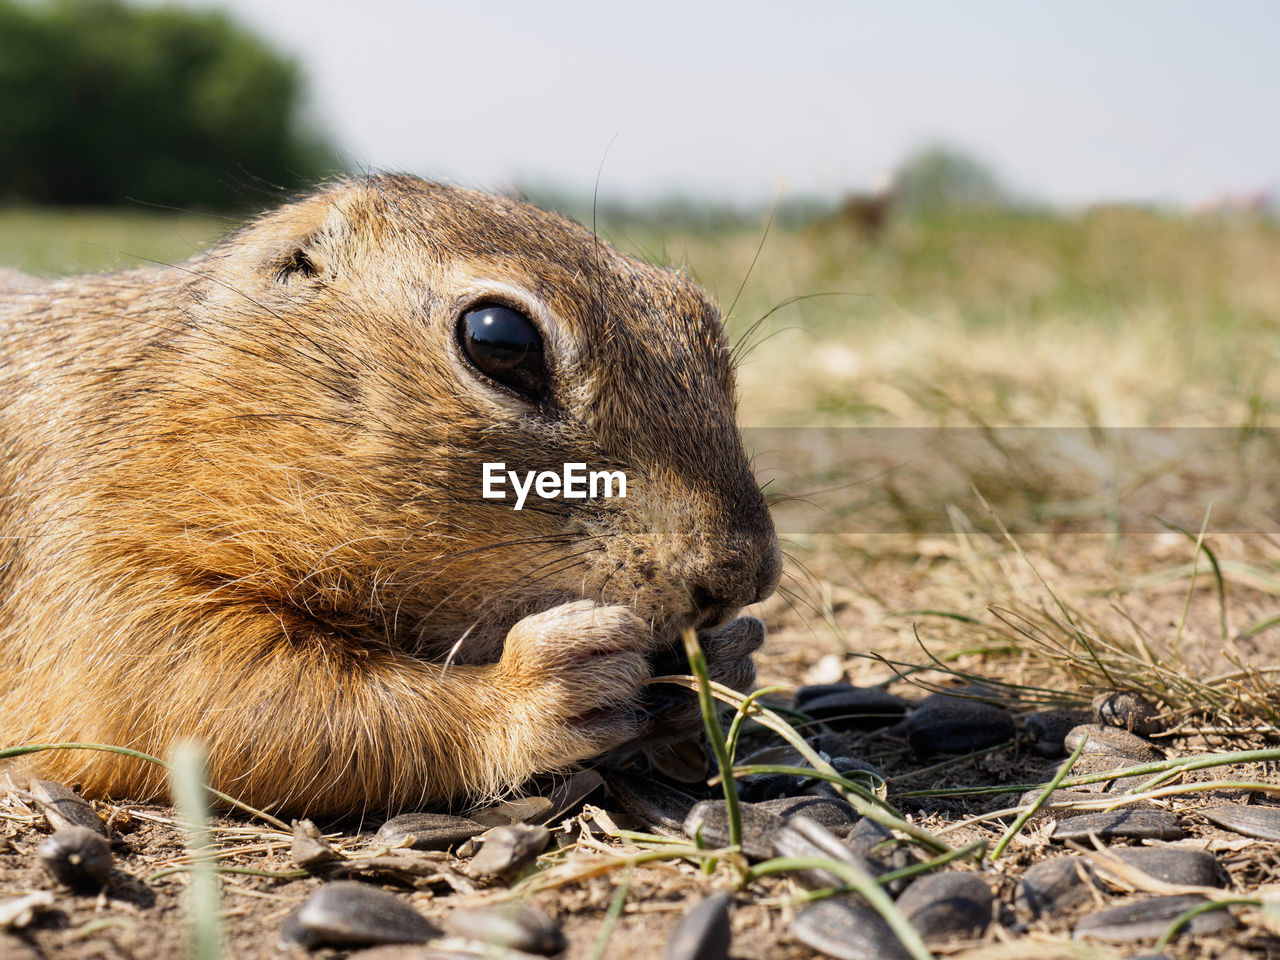 animal, animal themes, animal wildlife, one animal, wildlife, mammal, rodent, whiskers, nature, squirrel, prairie dog, eating, no people, close-up, grass, plant, pet, day, outdoors, animal body part, side view, portrait, land, cute, brown, chipmunk